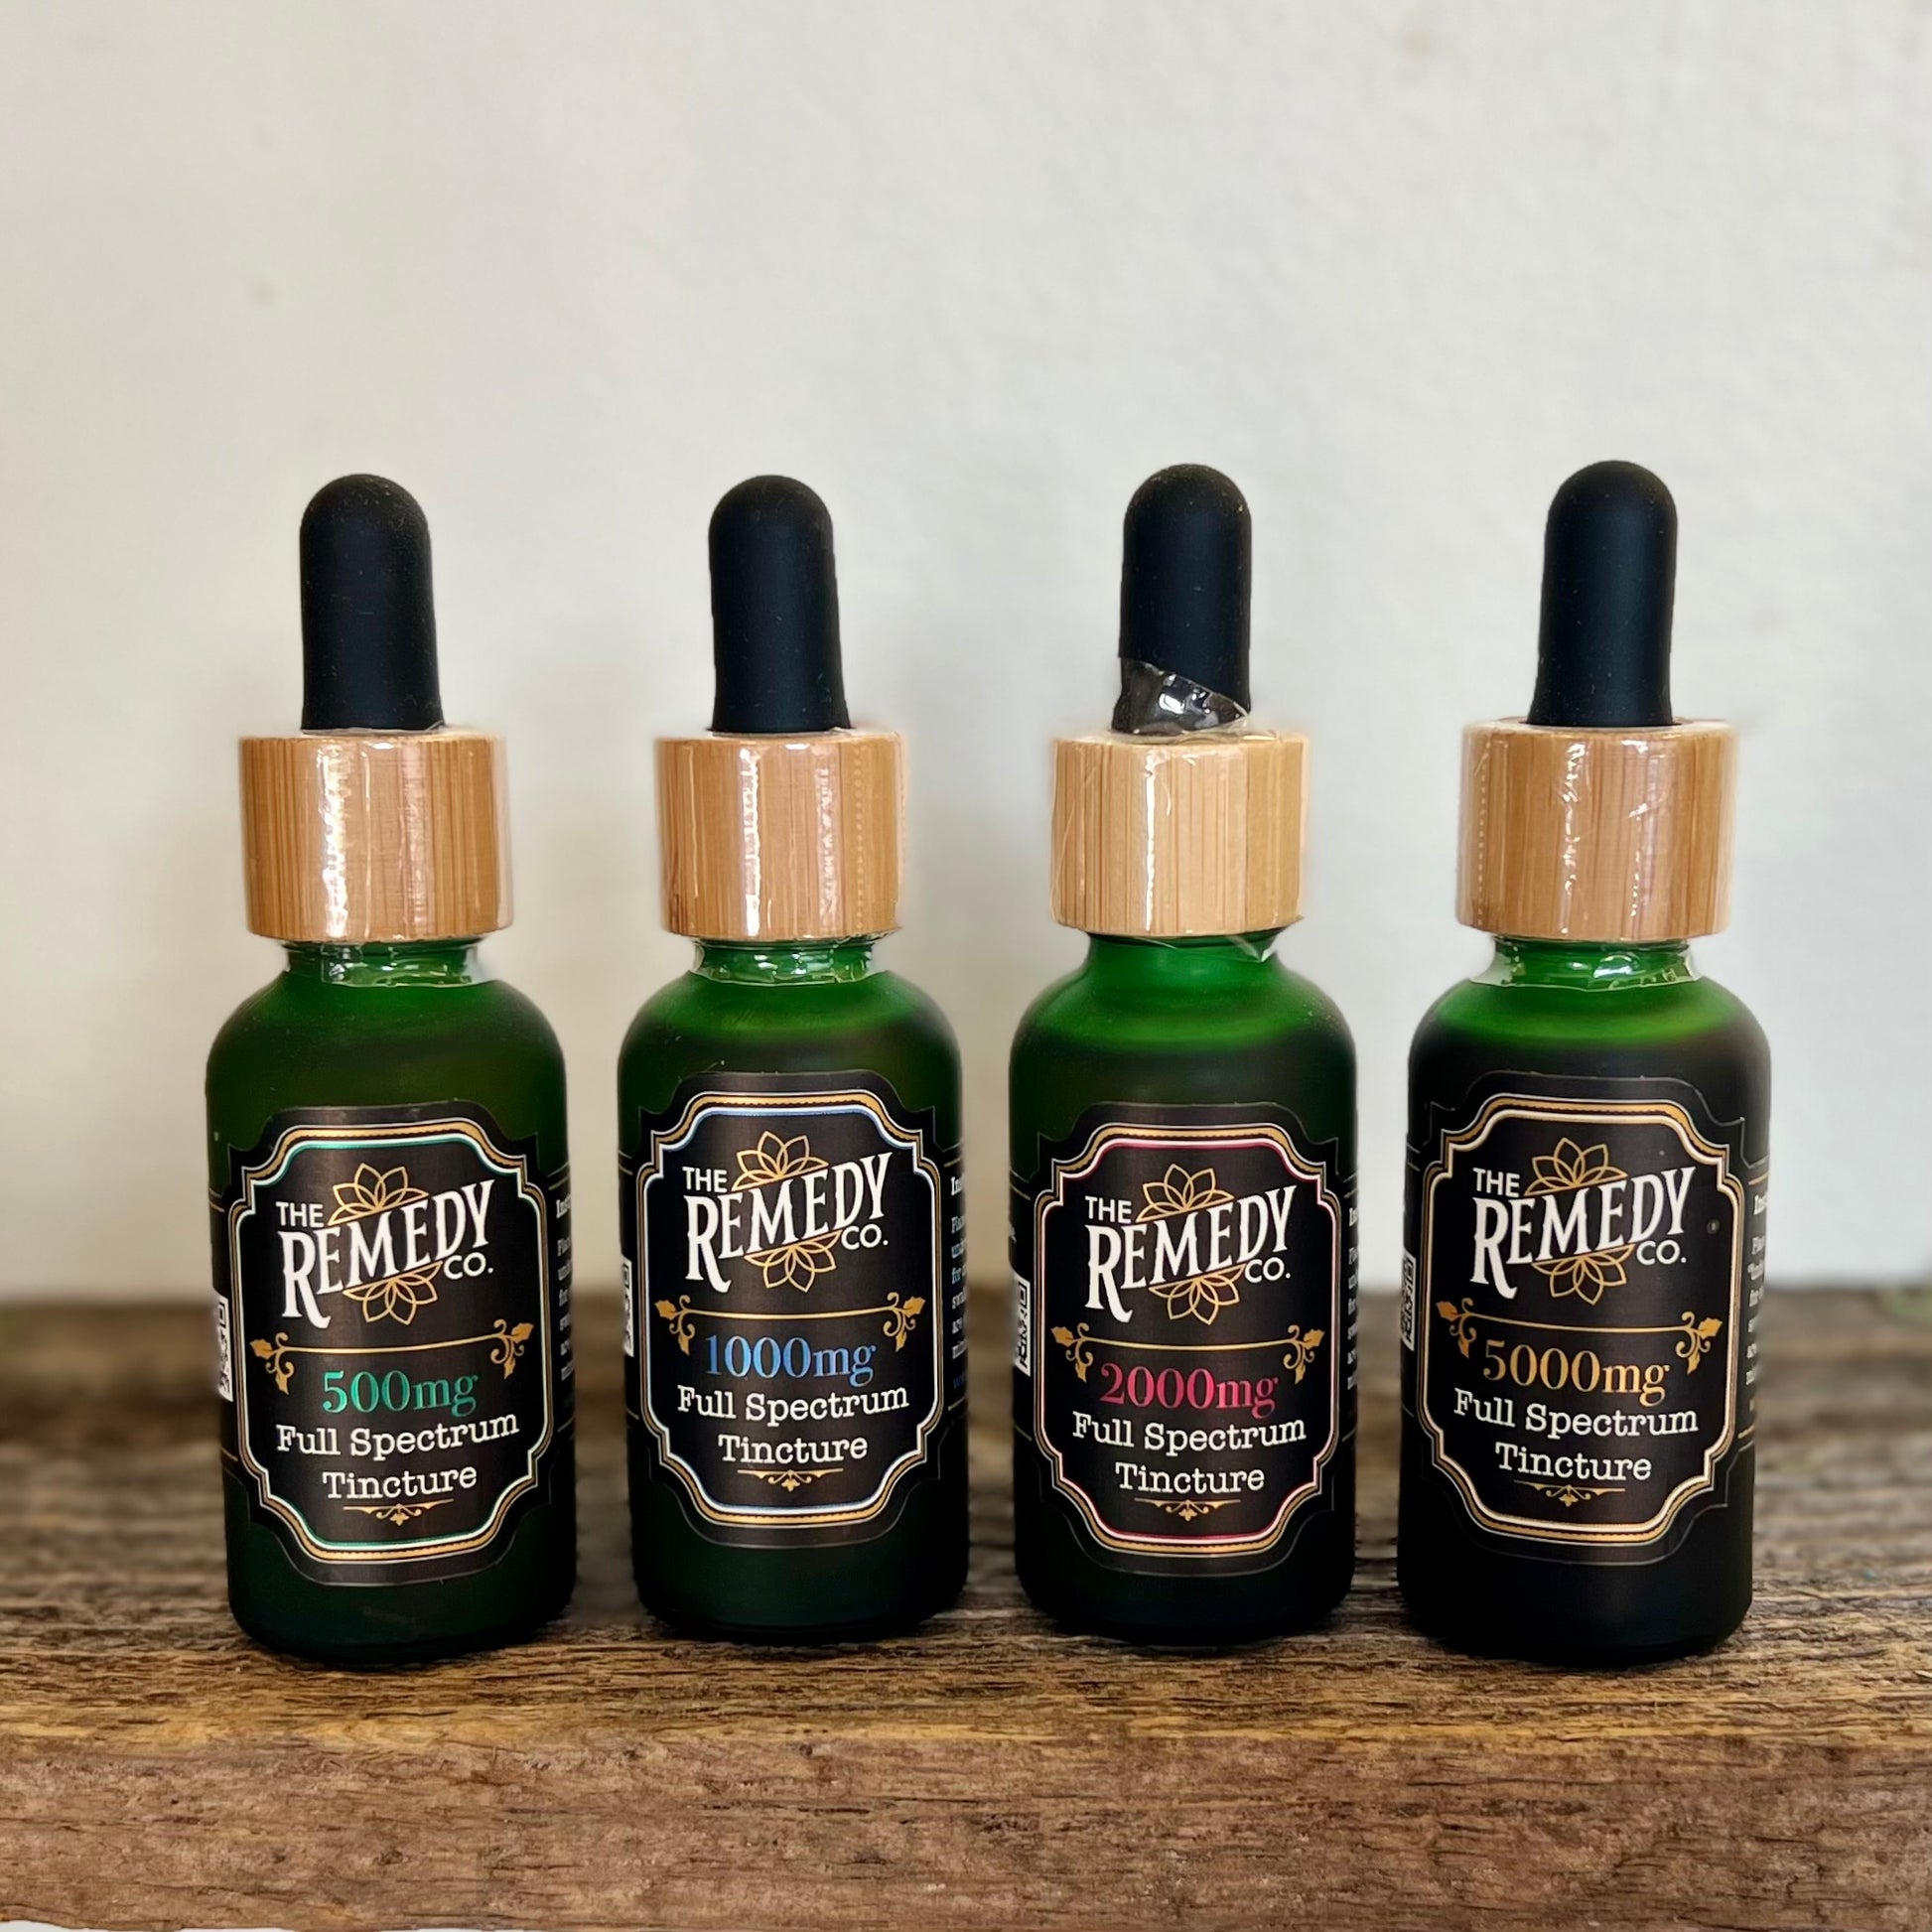 Full Spectrum Tincture Essential Oil+ - The Remedy Co.